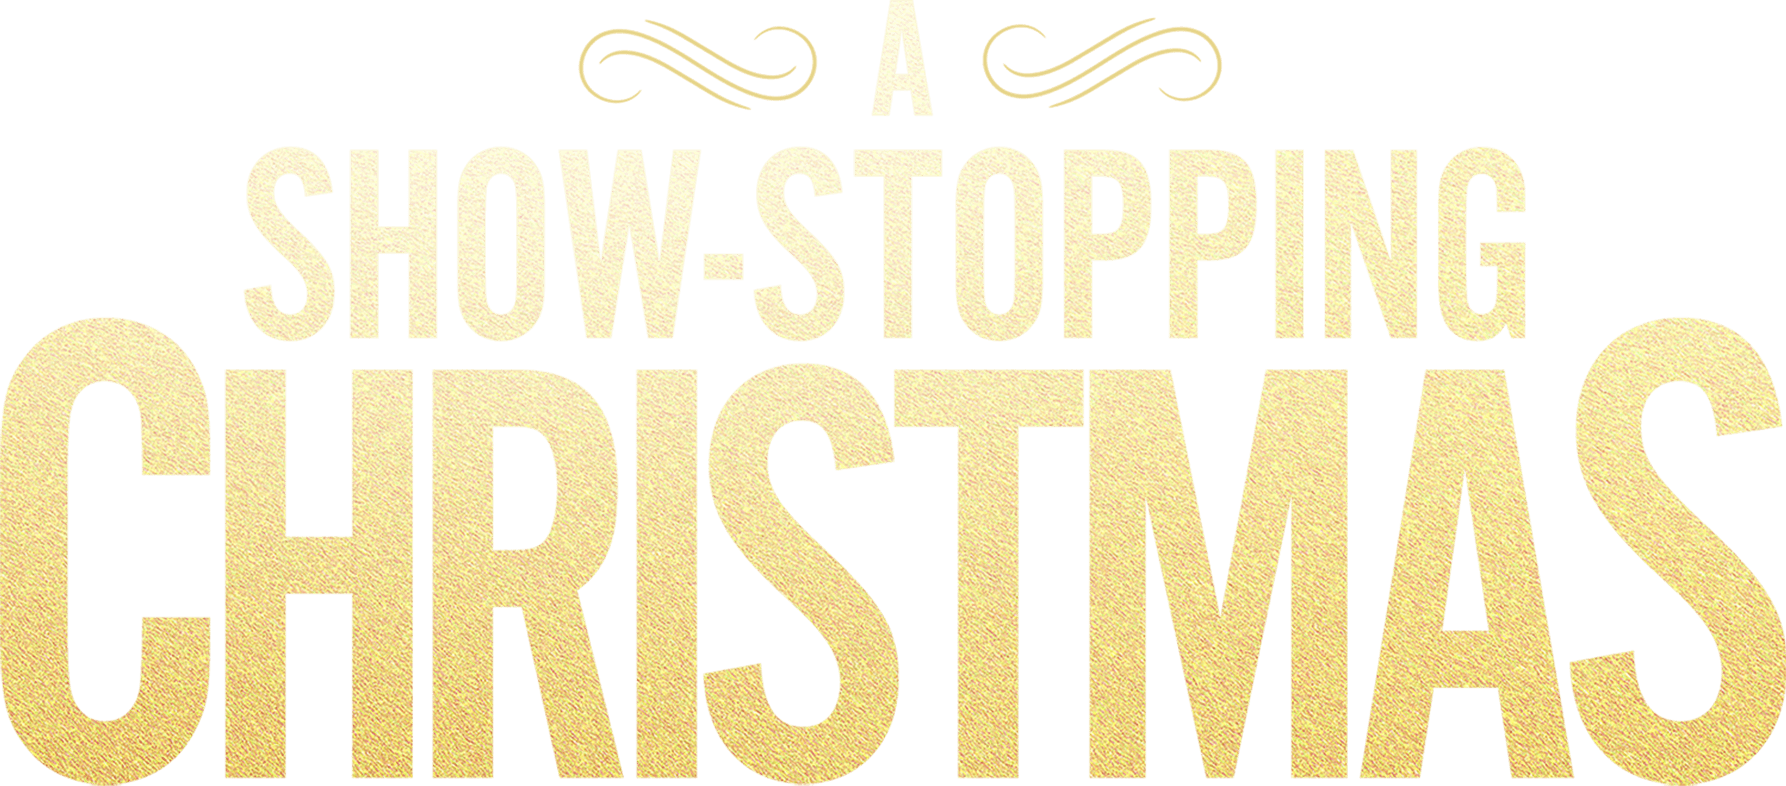 A Show-Stopping Christmas logo